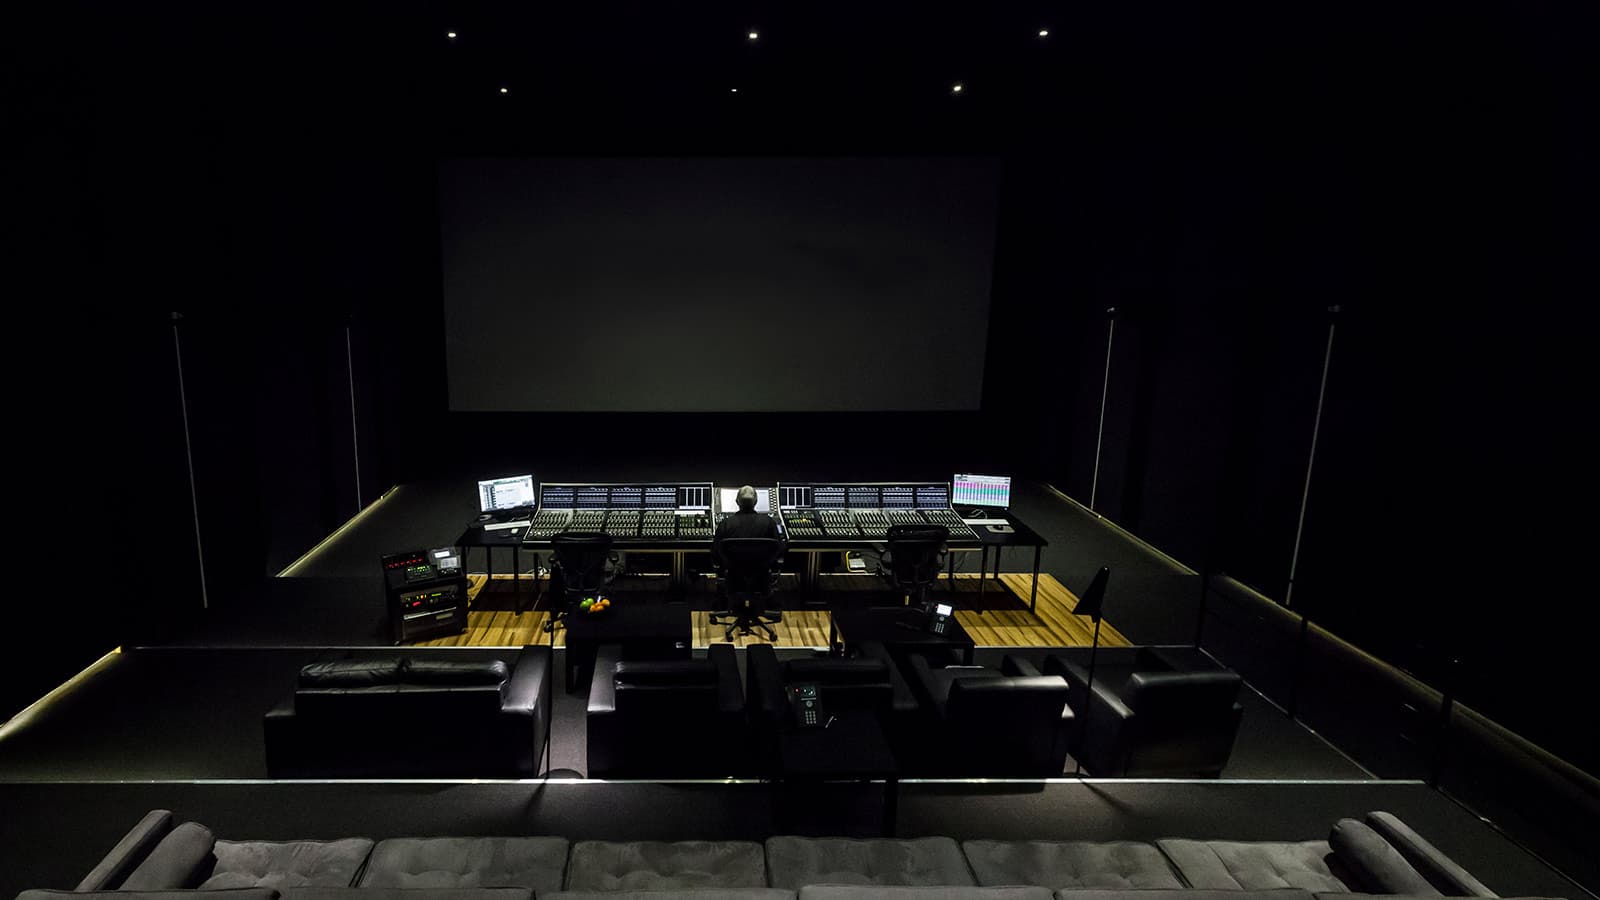 Soundfirm Installs Australia's First Meyer Sound Cinema System for Dolby Atmos Dubbing Stage